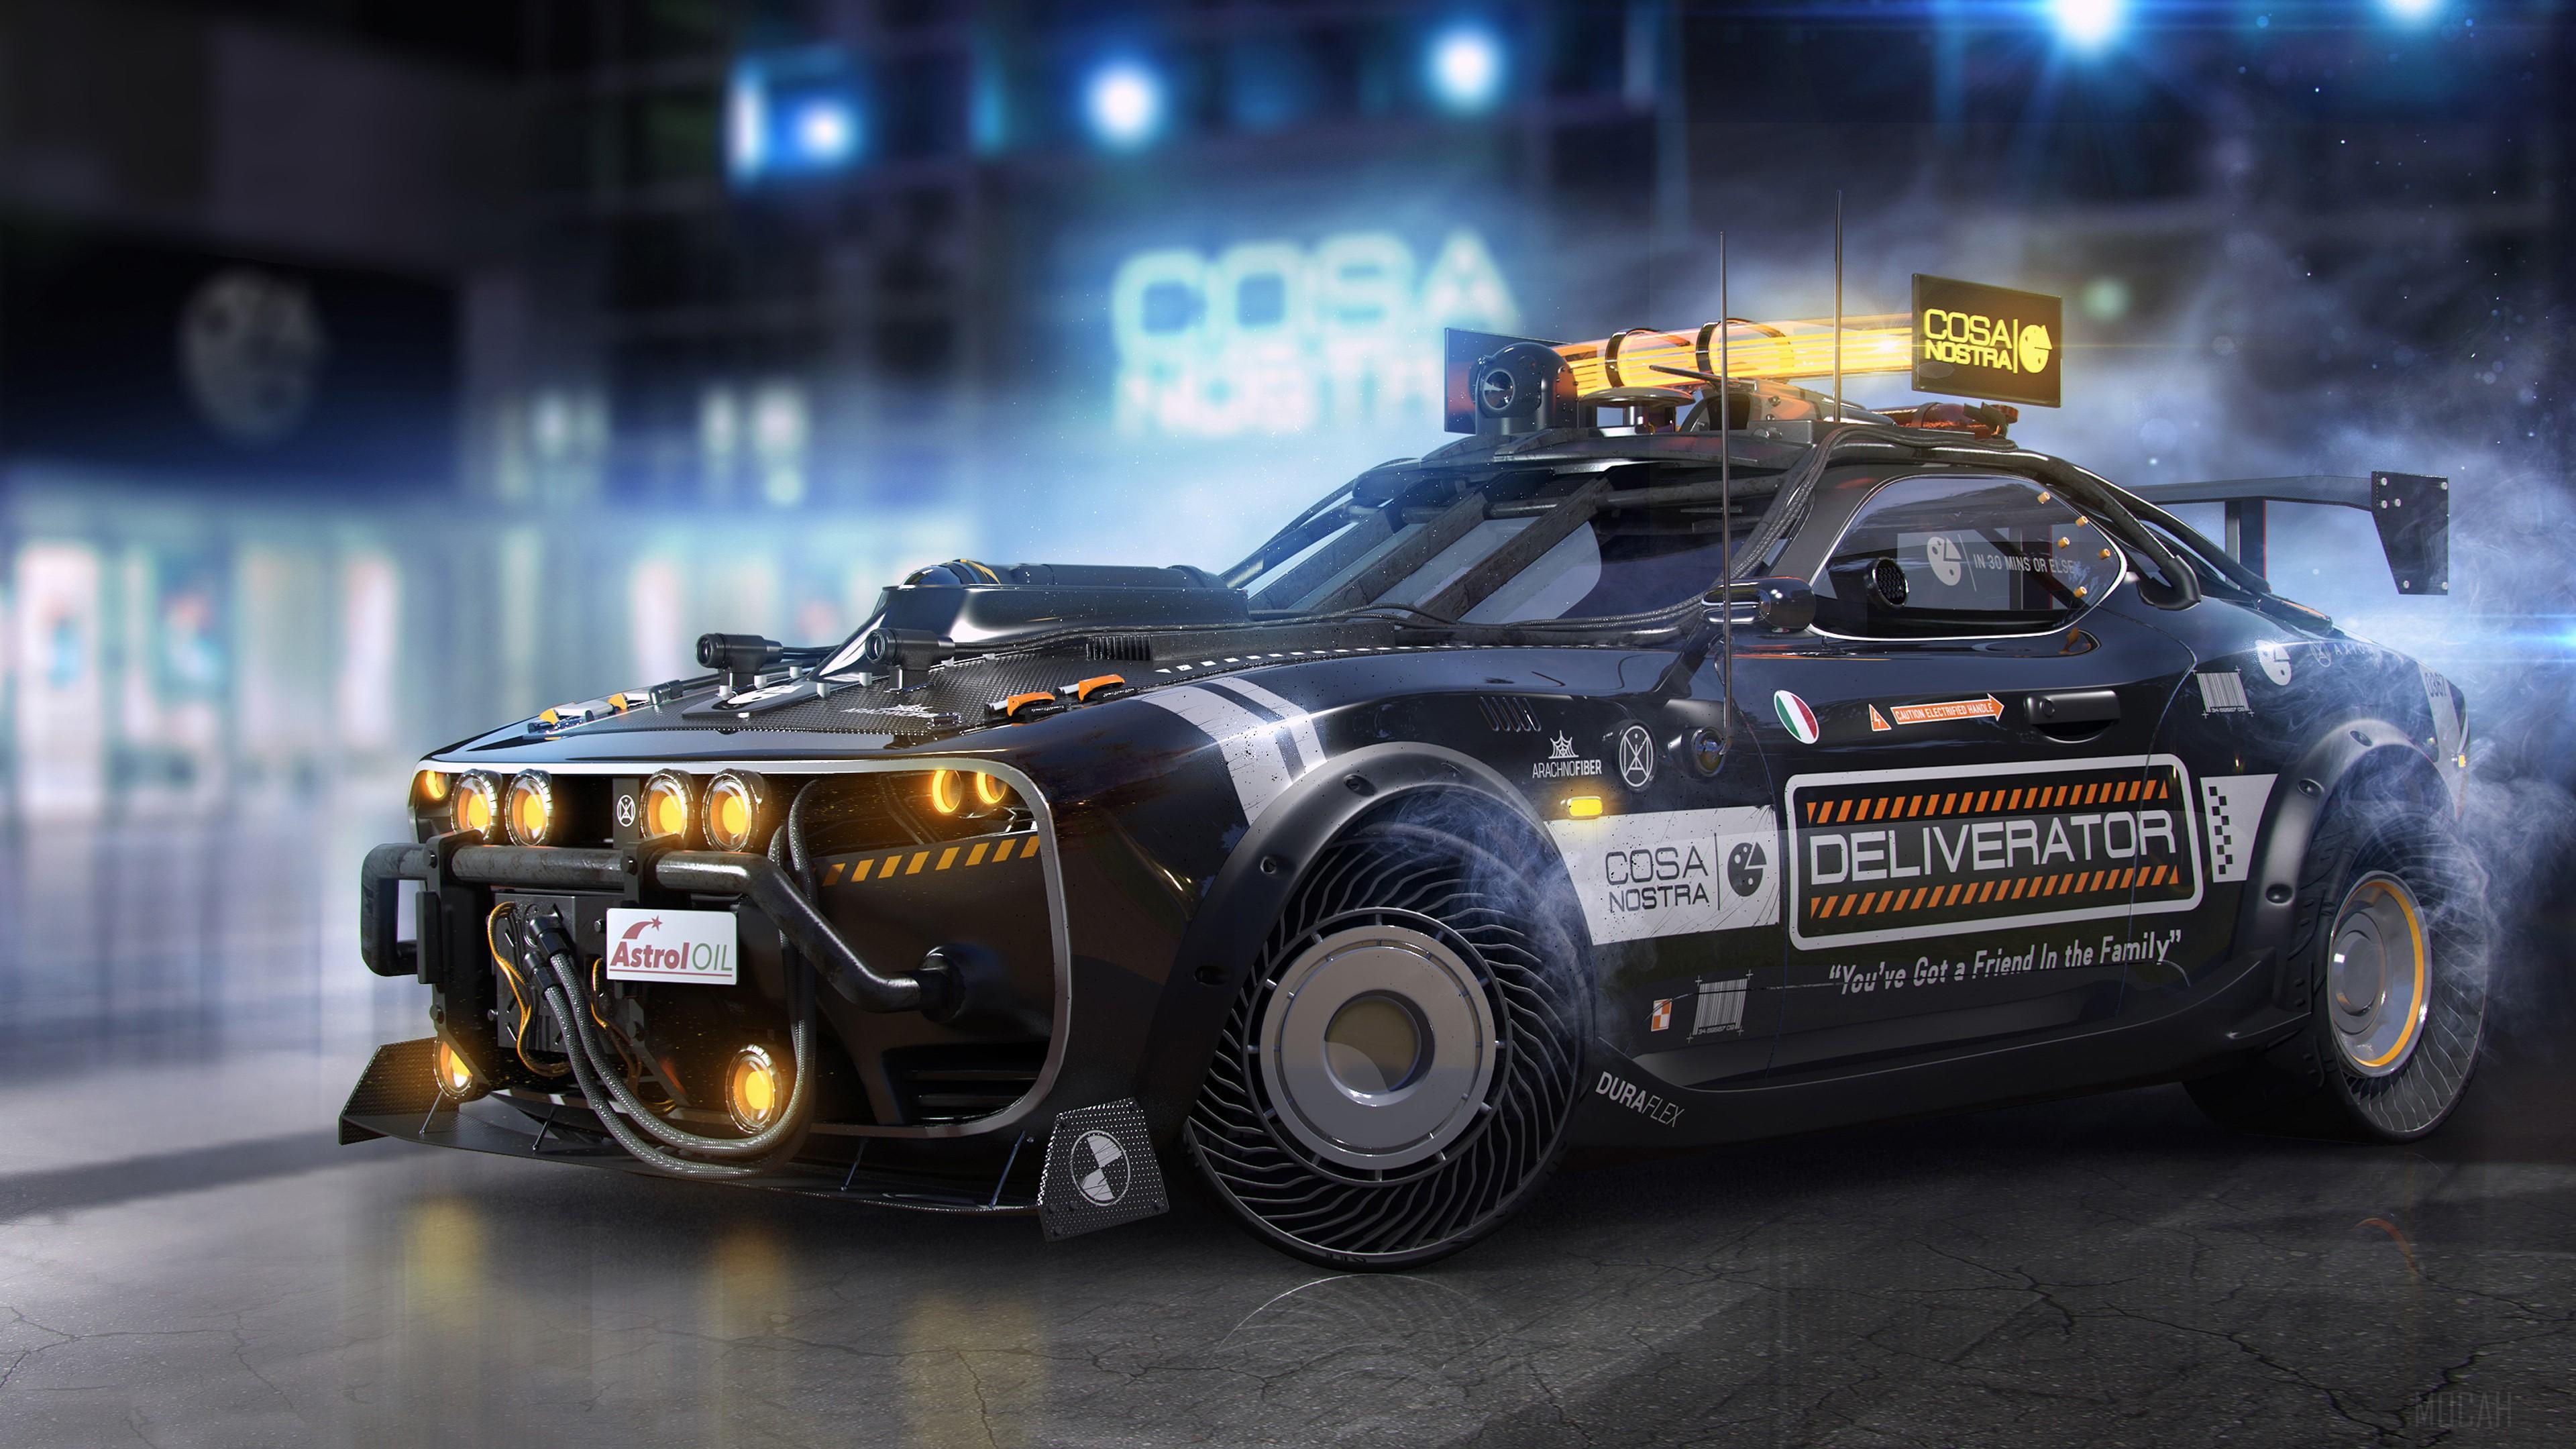 HD wallpaper, Cosa Nostra Pizza Delivery Vehicle 4K